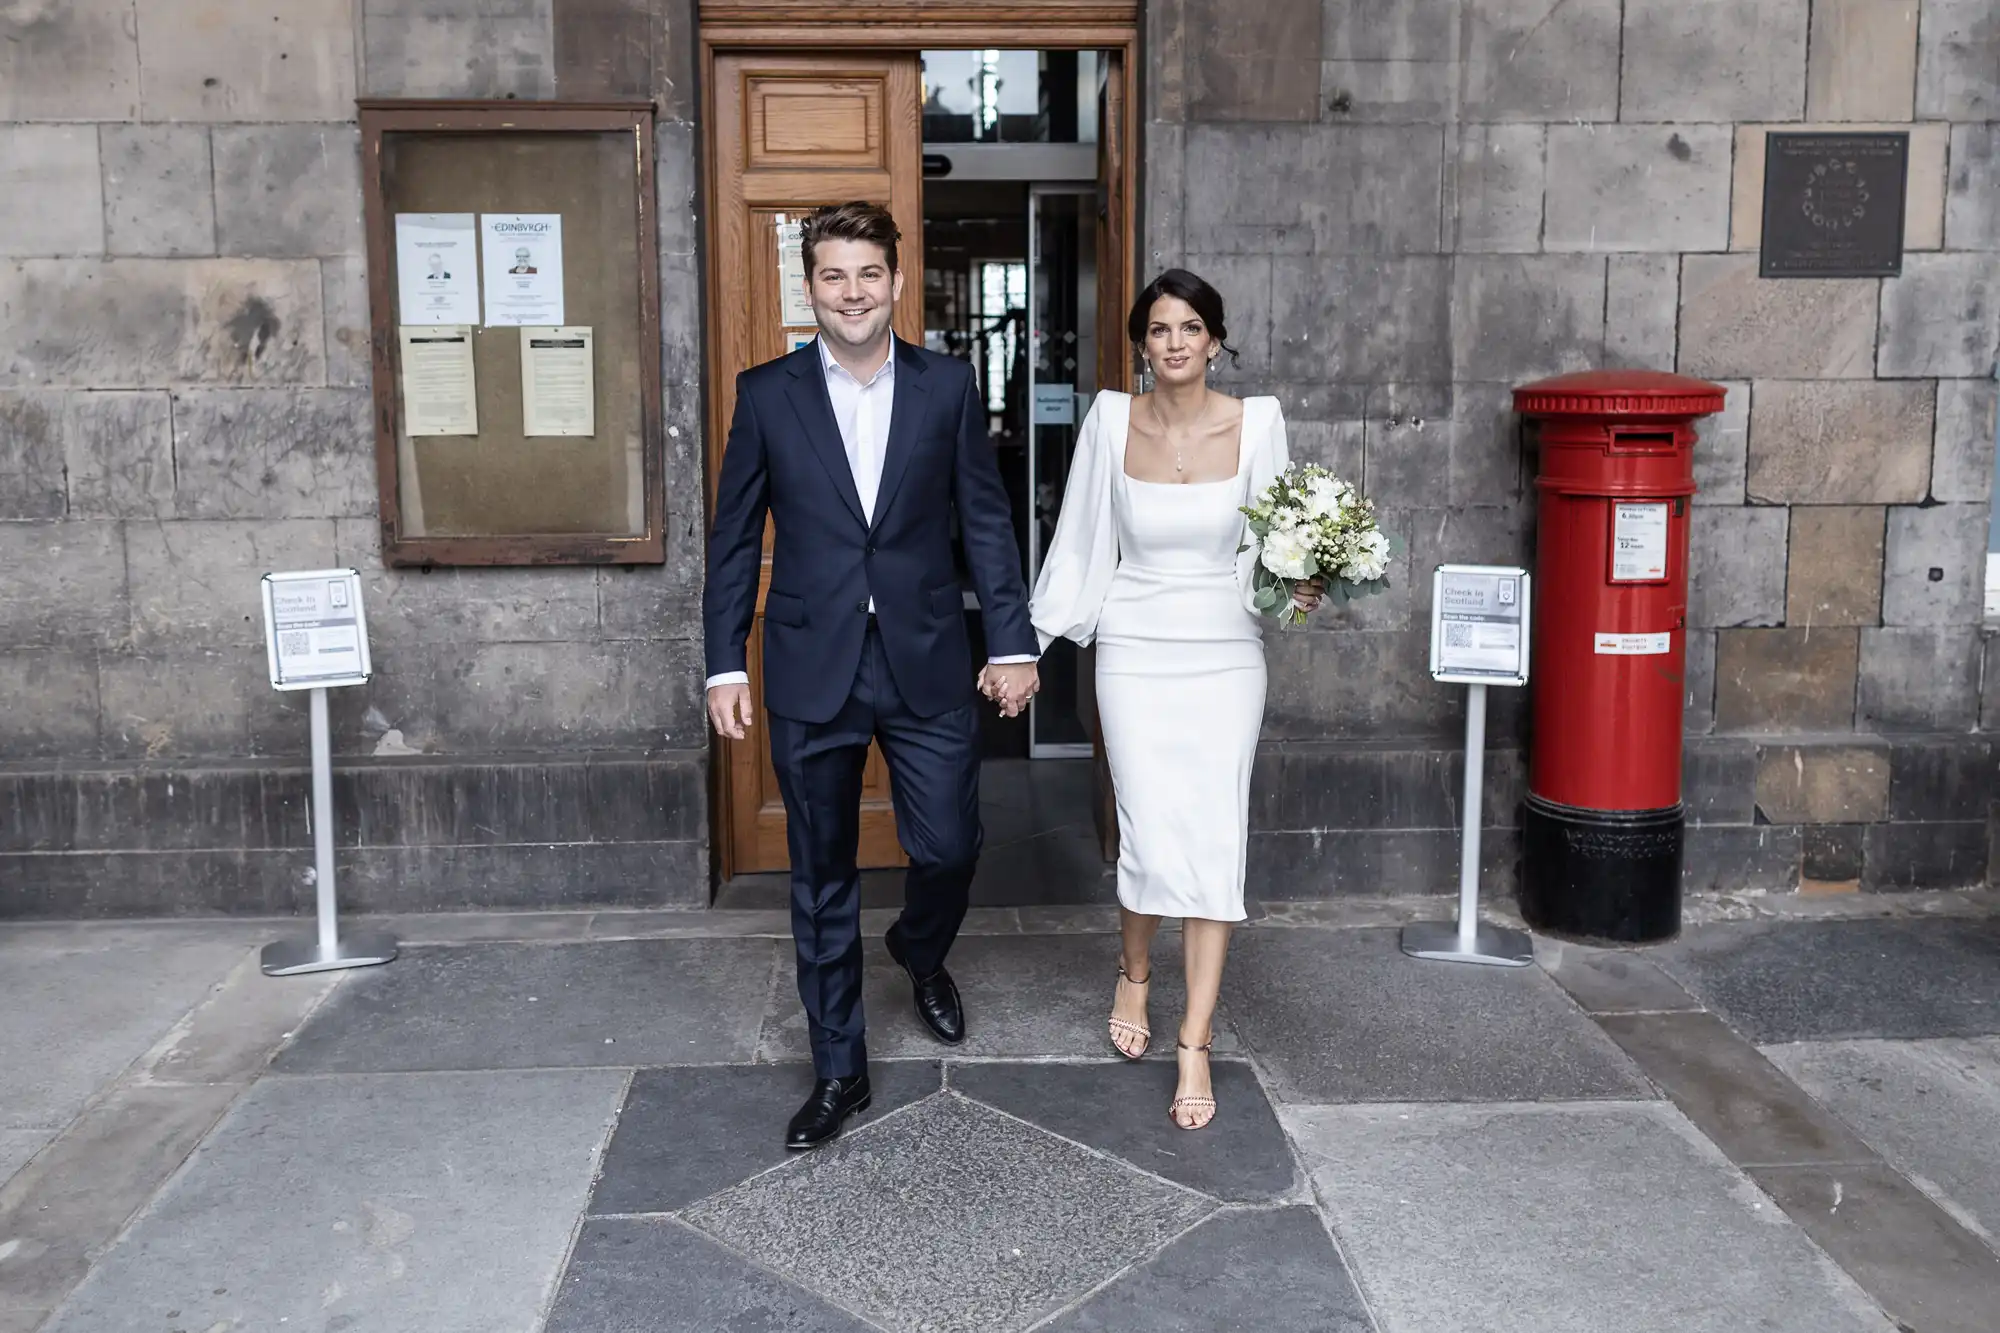 A newlywed couple holding hands and smiling, exiting a stone building, walking past a red post box. the bride wears a white dress and carries a bouquet.